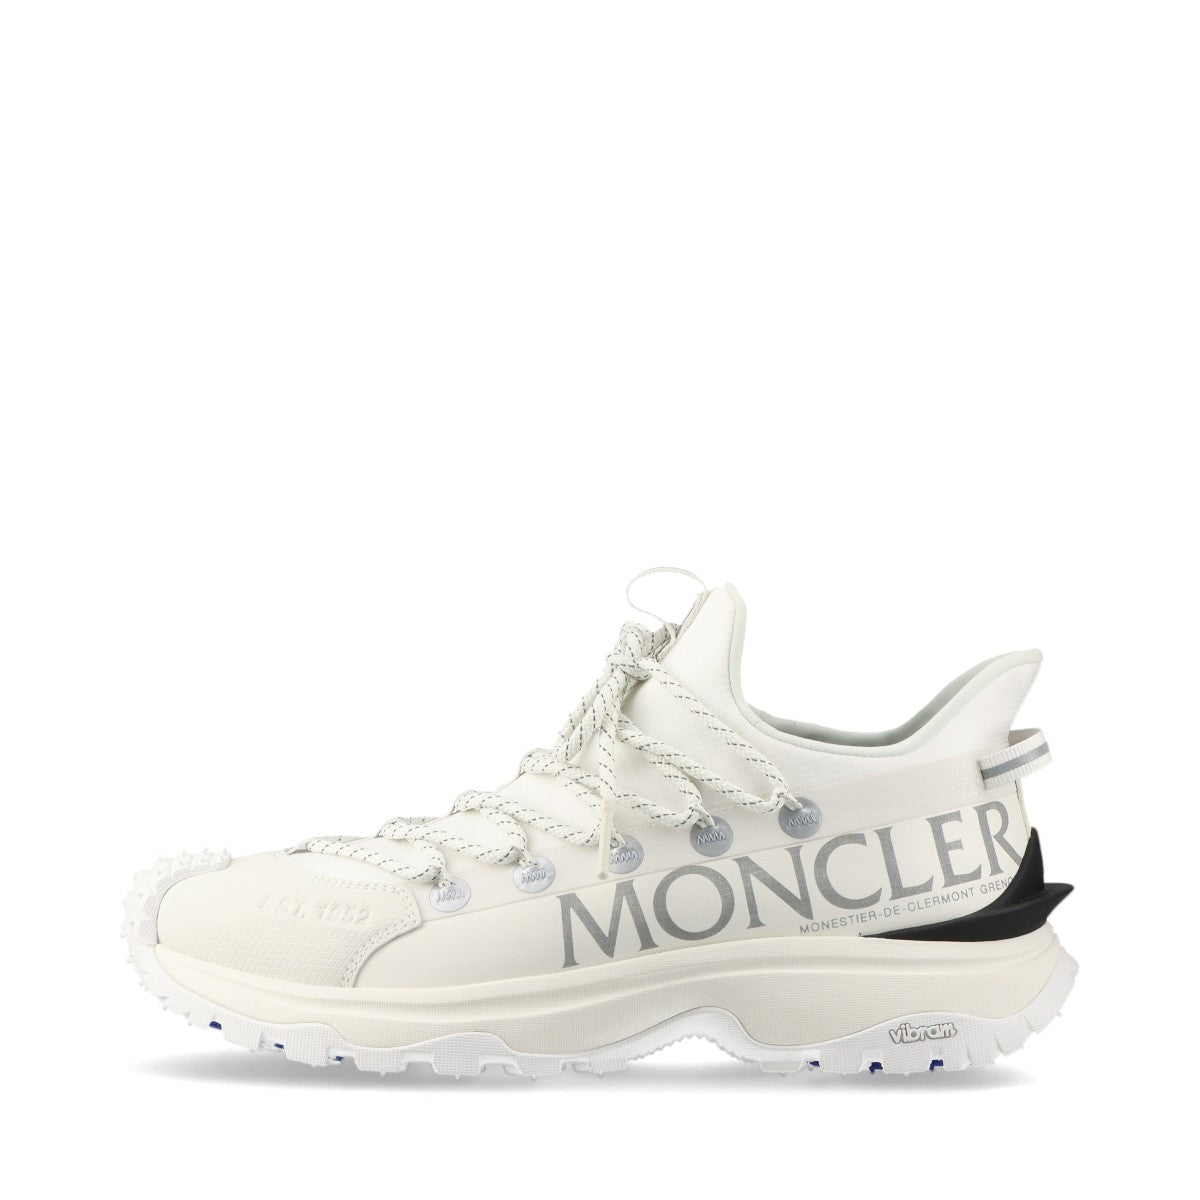 Moncler Trailgrip Lite 2 23AW Fabric Sneakers 42 Men's Gray x white vibram sole Box There is a storage bag